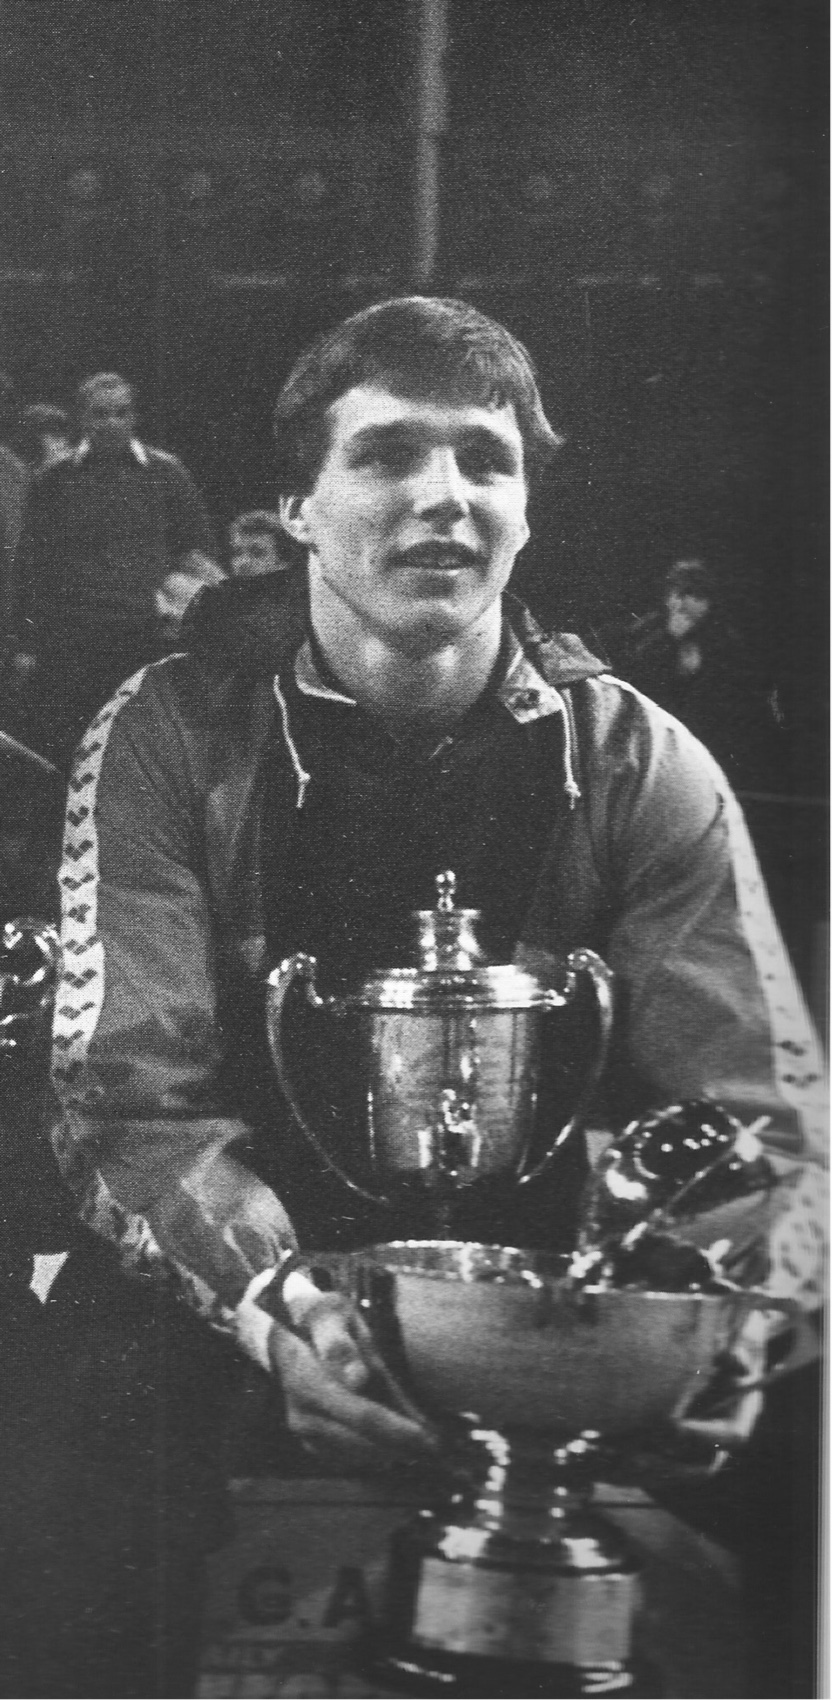 Keith Langley after winning the British Championship in 1981